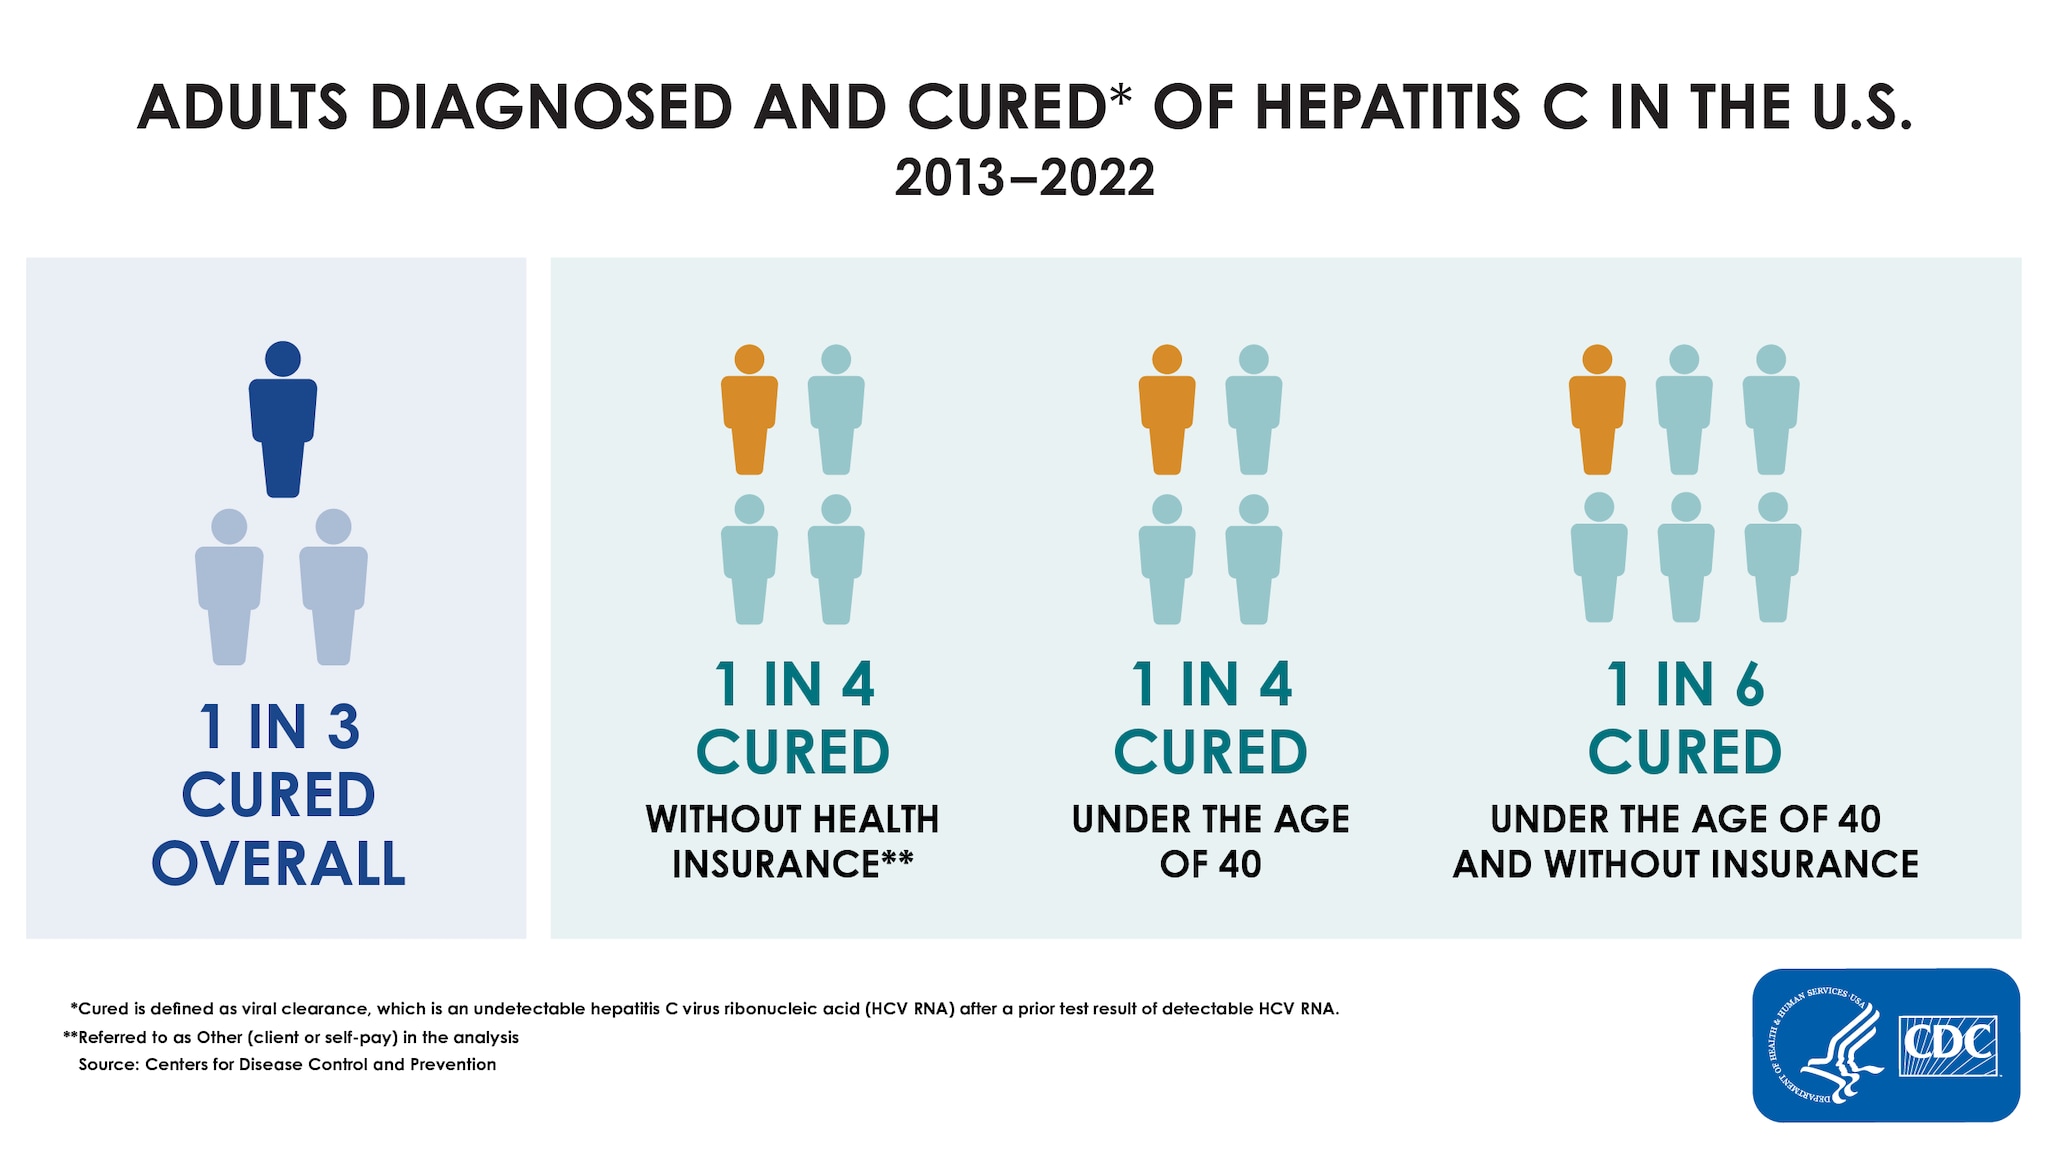 Chart shows figures shaded to represent the number of people diagnosed with hepatitis C who were cured. Overall, only 1 in 3 were cured & it’s lower for adults under 40 and for people who are uninsured.